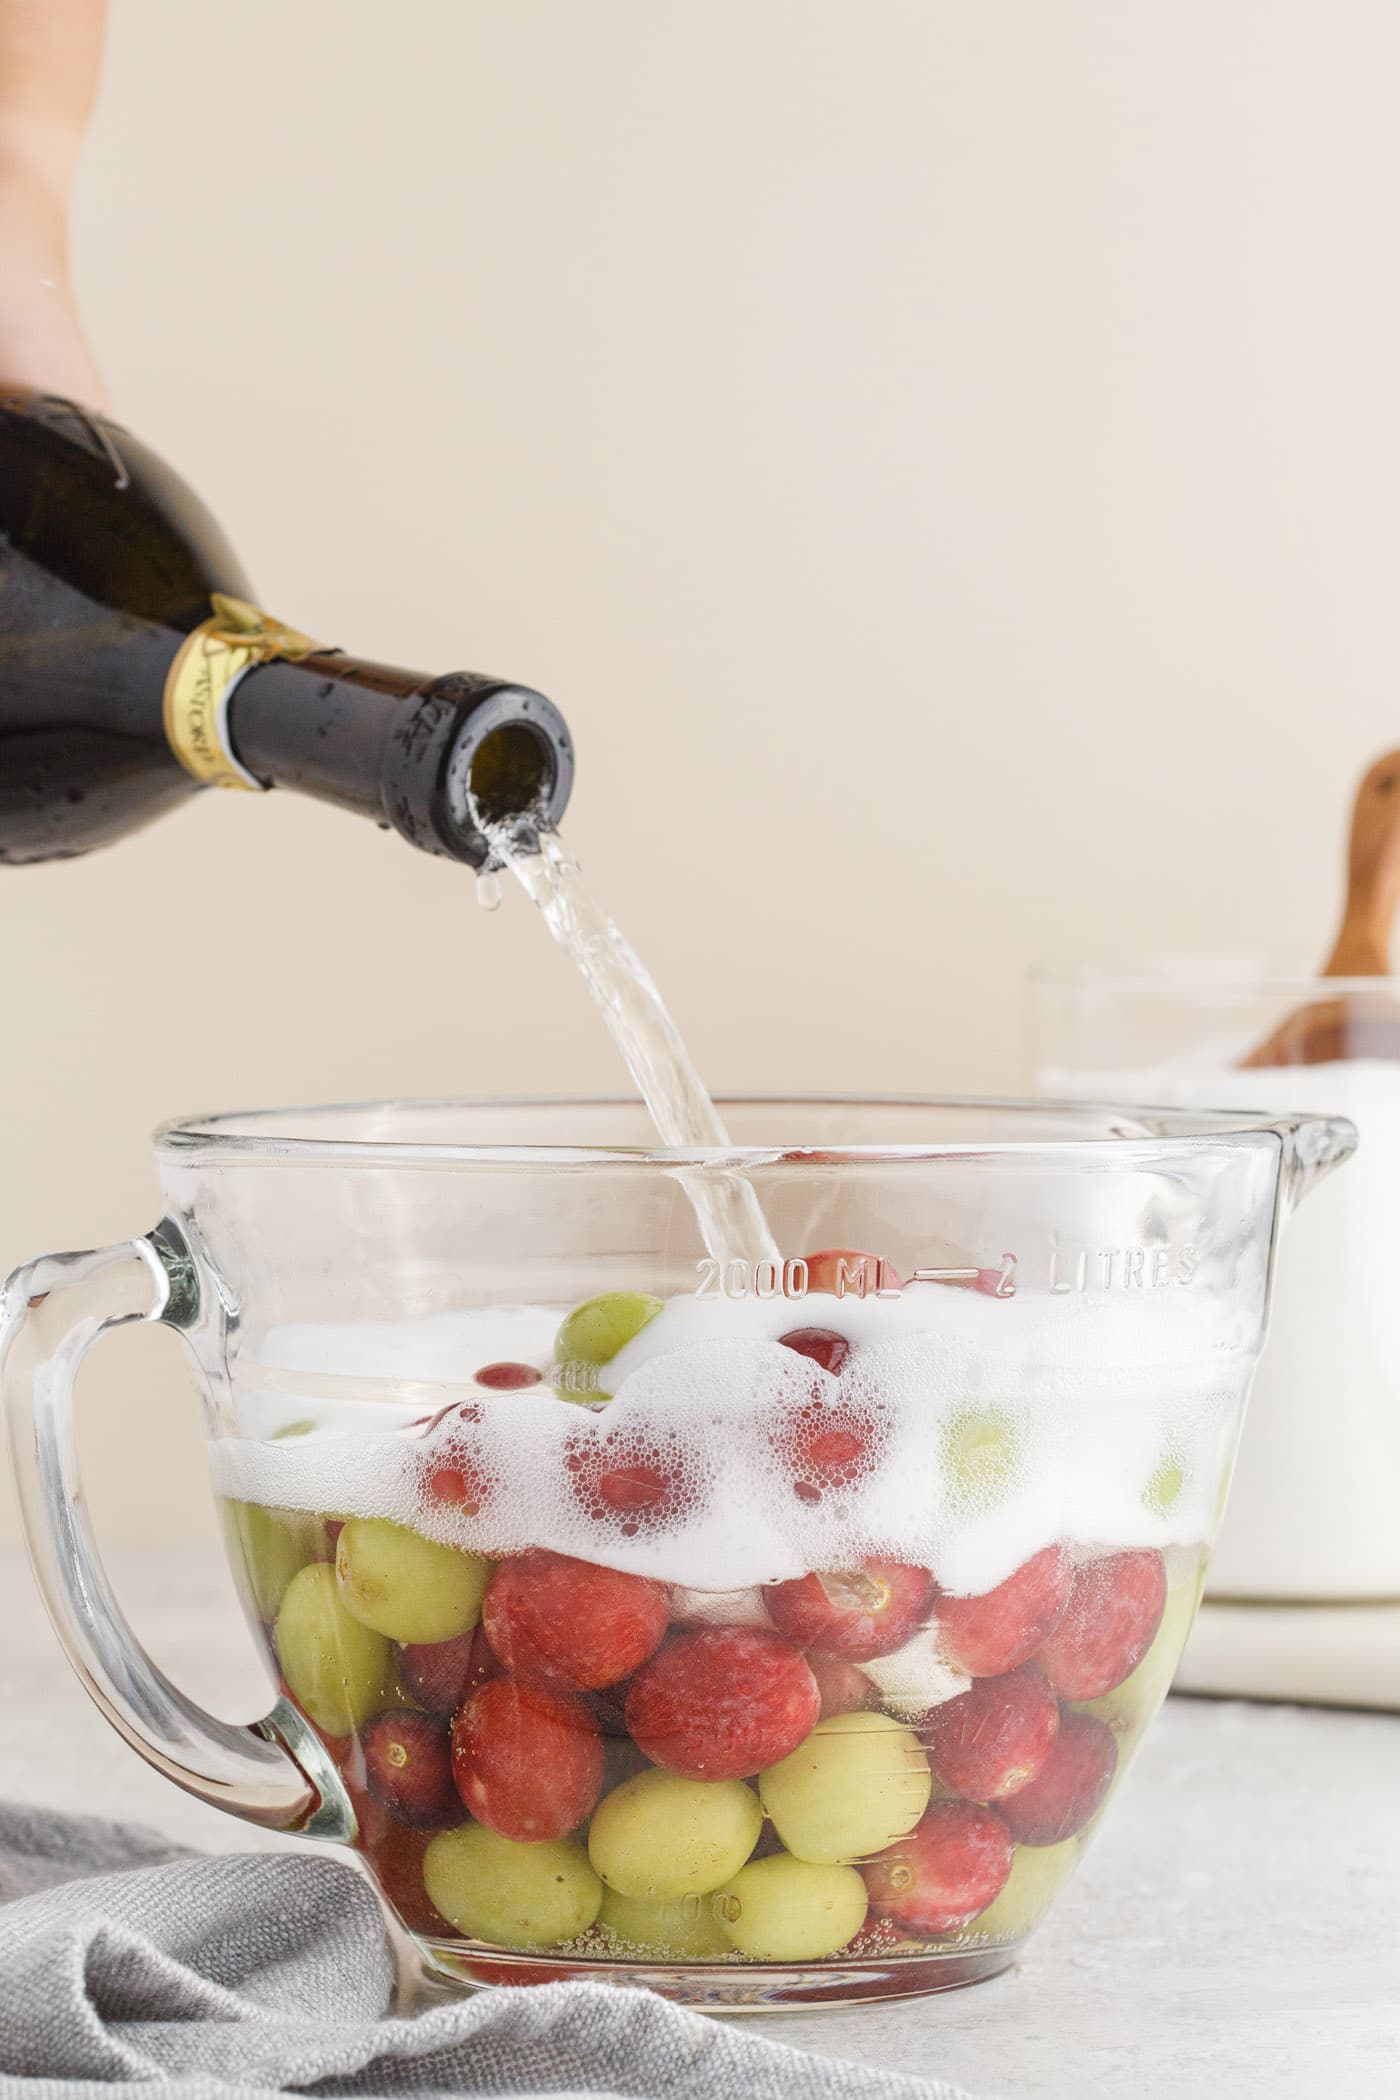 pouring prosecco into a bowl of grapes